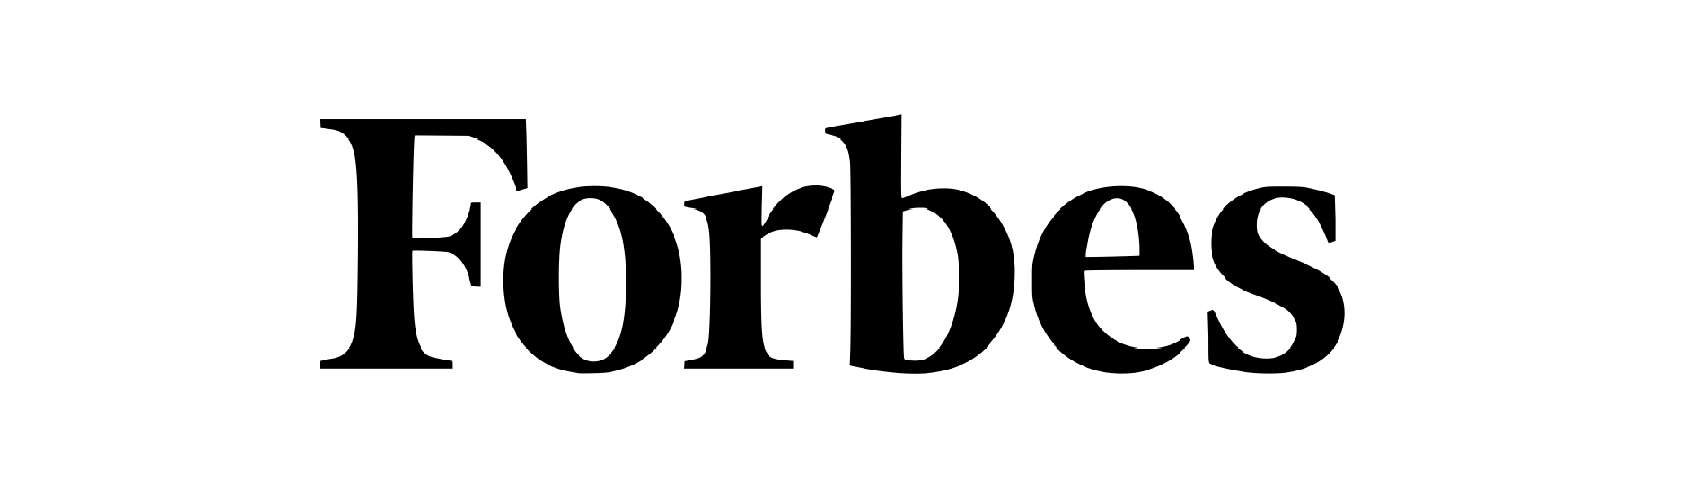 forbes about thedressoutlet.com